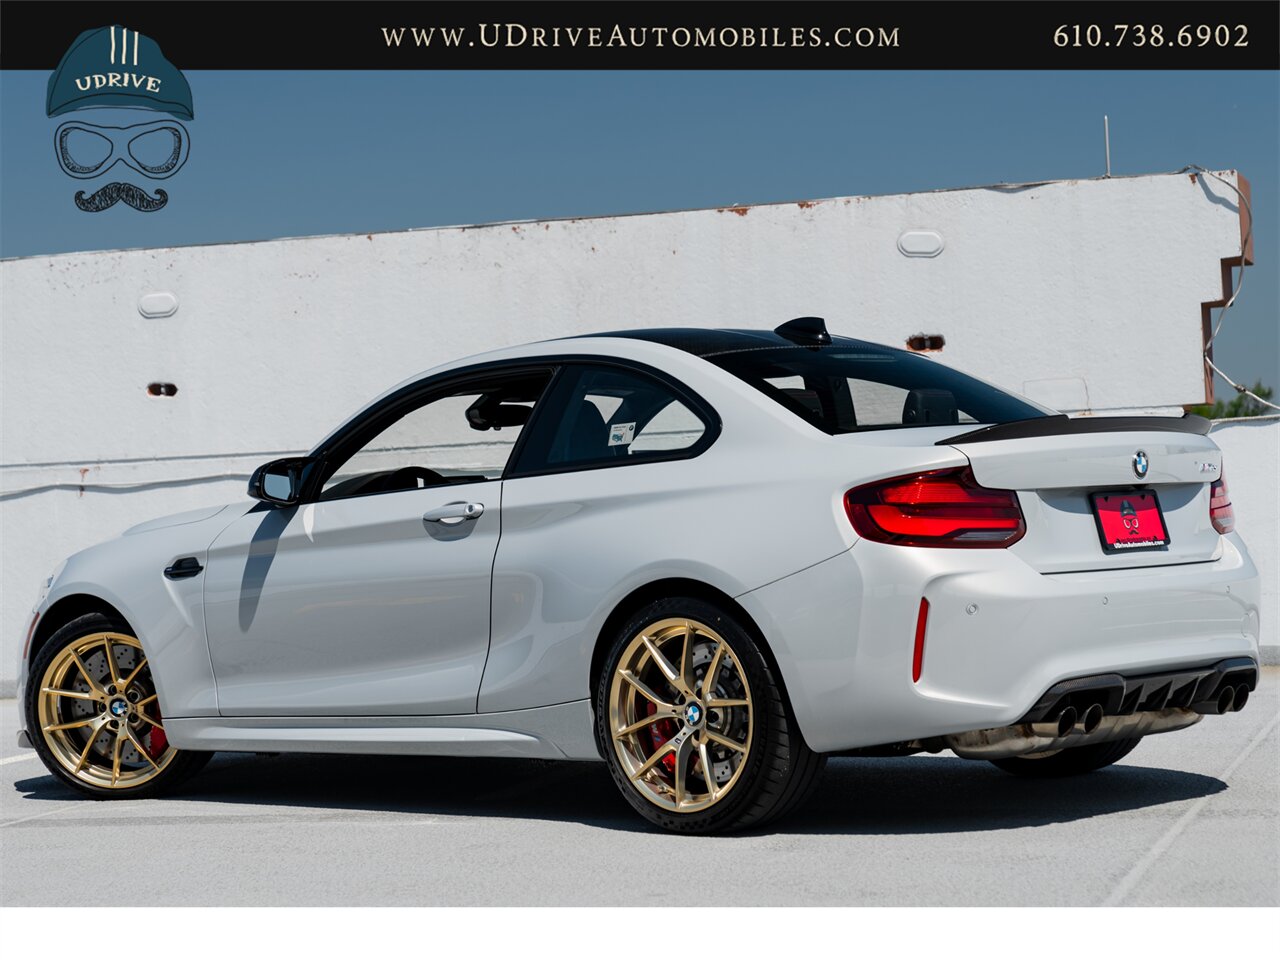 2020 BMW M2 CS  M2 CS 6 Speed Manual 2k Miles Full Body PPF Factory Warranty until 2025 - Photo 4 - West Chester, PA 19382